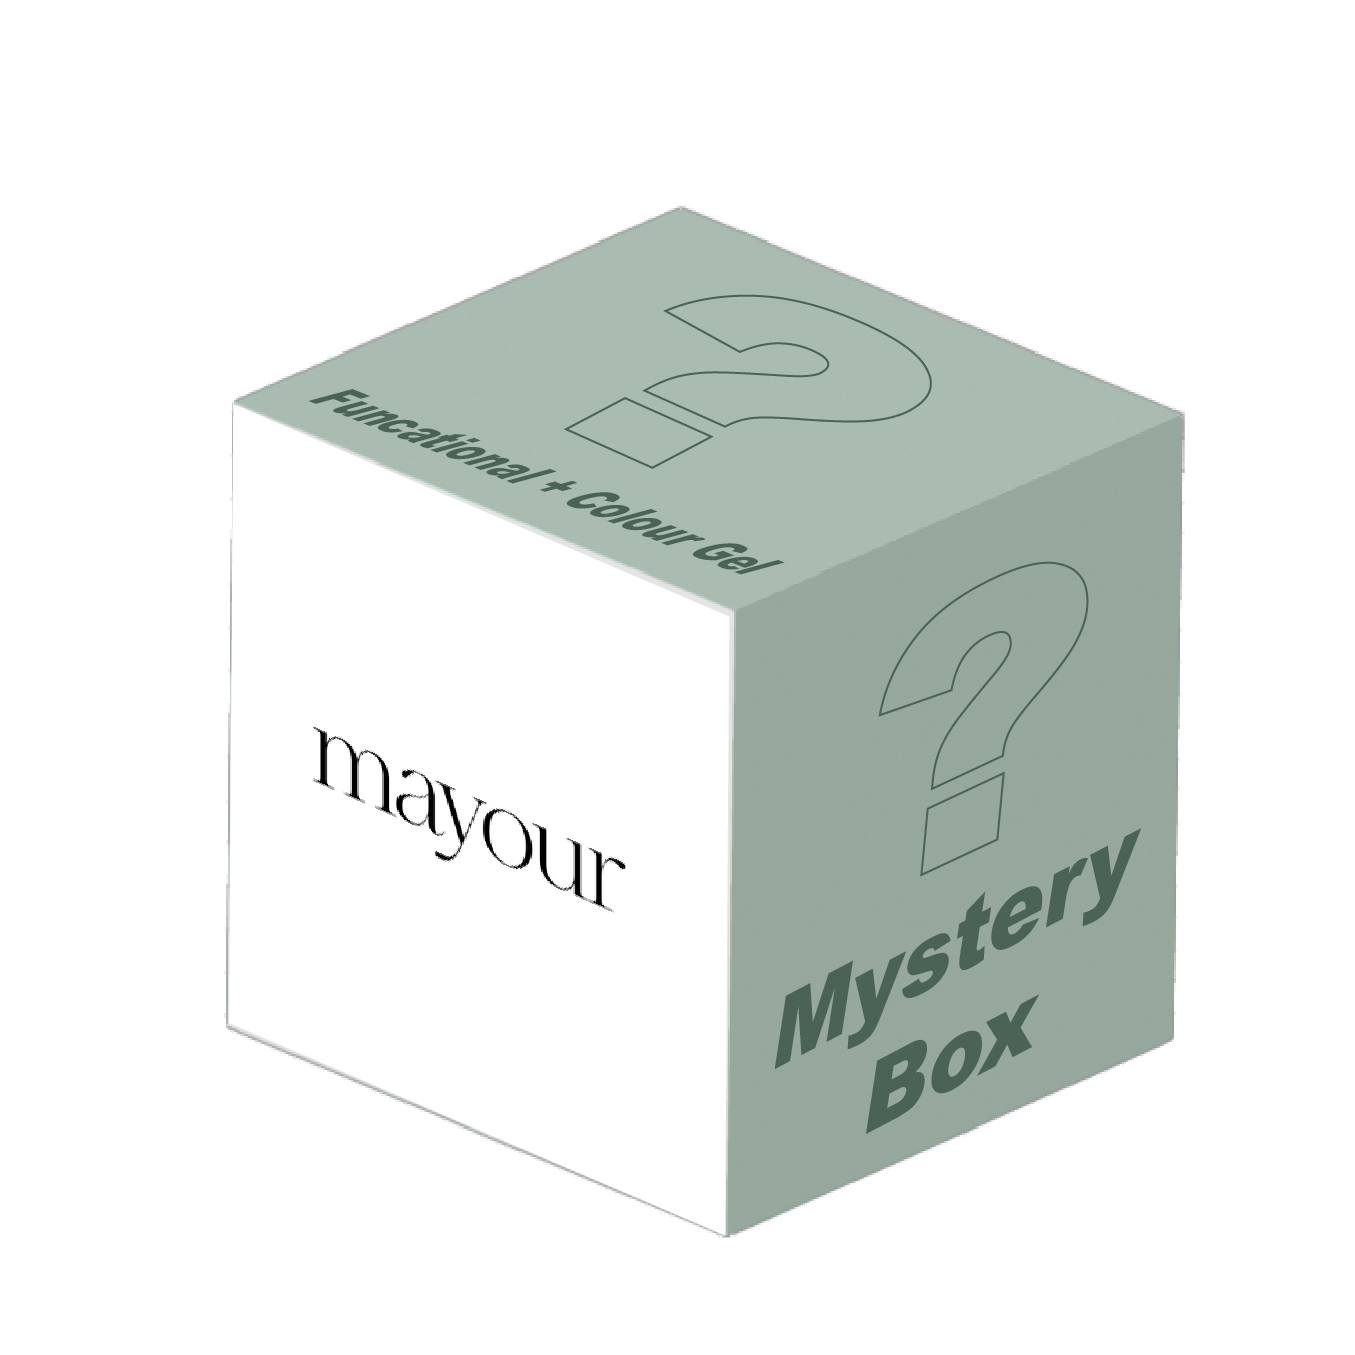 Mayour Limited Mystery Box 2023